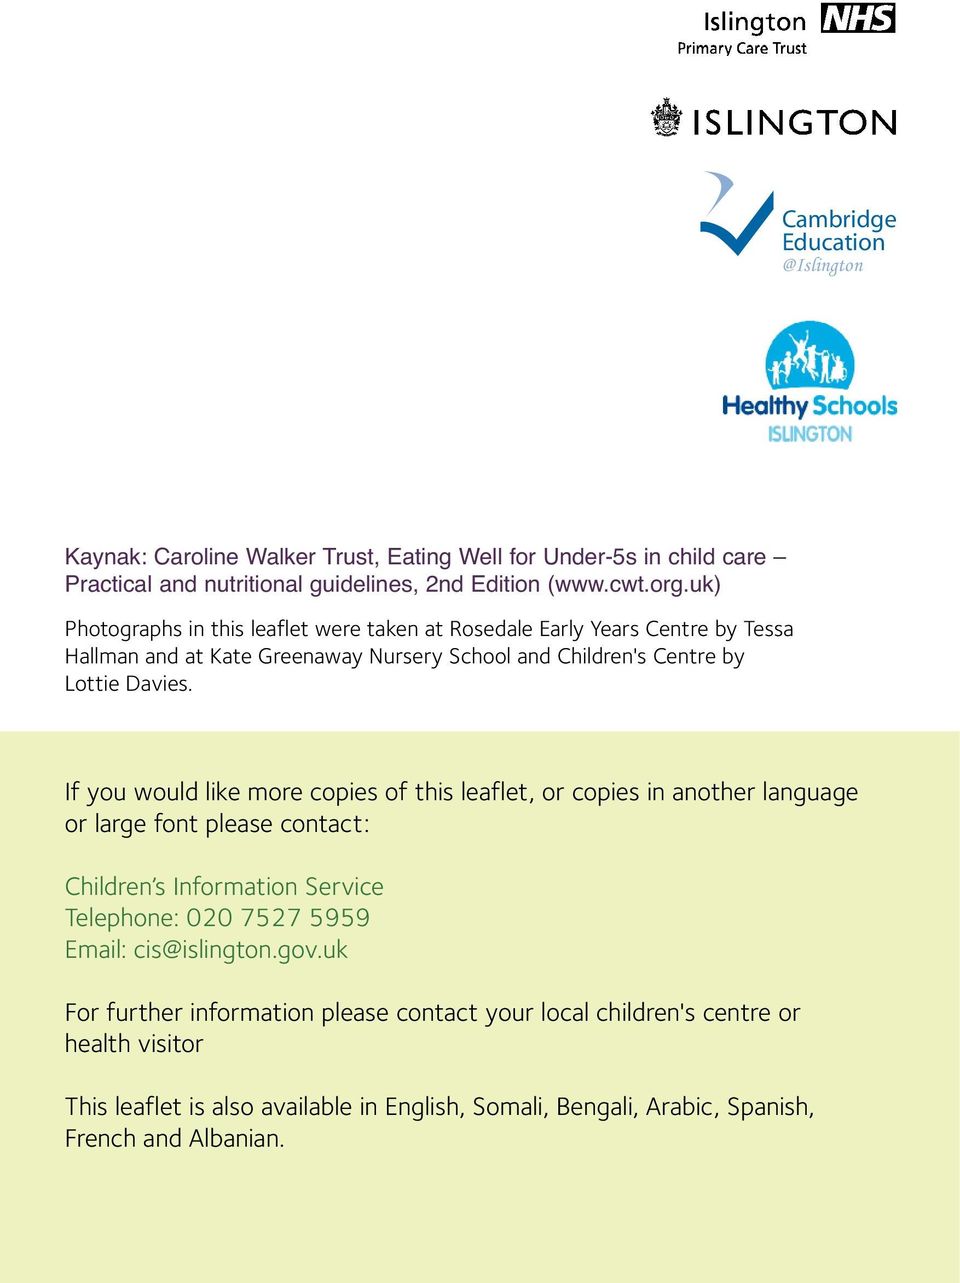 If you would like more copies of this leaflet, or copies in another language or large font please contact: Children s Information Service Telephone: 020 7527 5959 Email: